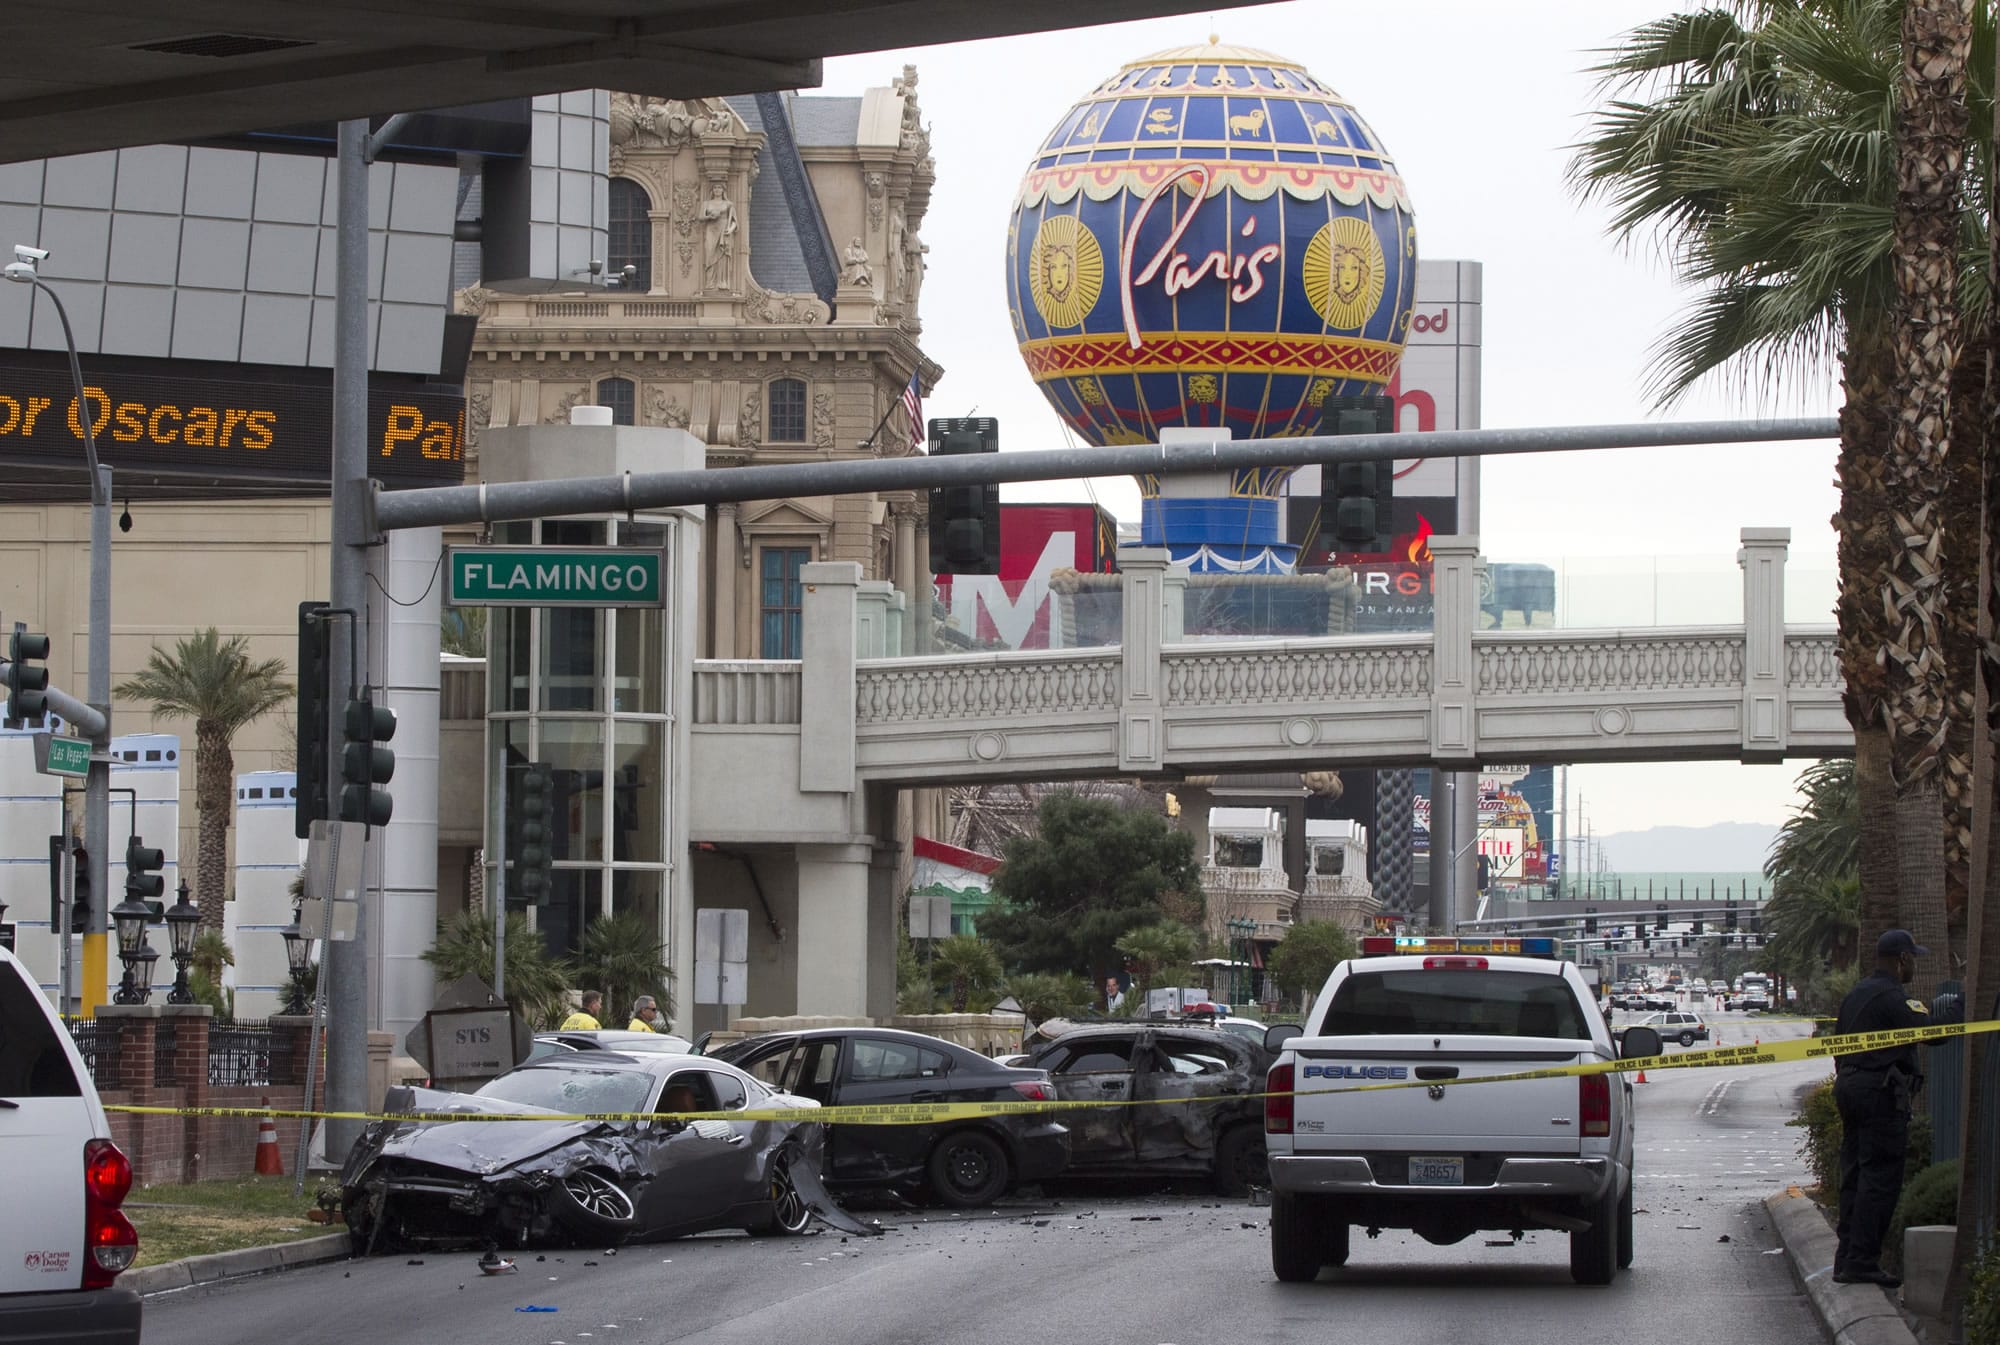 Police rope off the scene of a shooting and multi-car accident on the Las Vegas Strip early Thursday. Authorities say at least one person in a Range Rover shot at people in a Maserati that then crashed into a taxi cab. The taxi cab burst into flames, and the driver and passenger were killed.